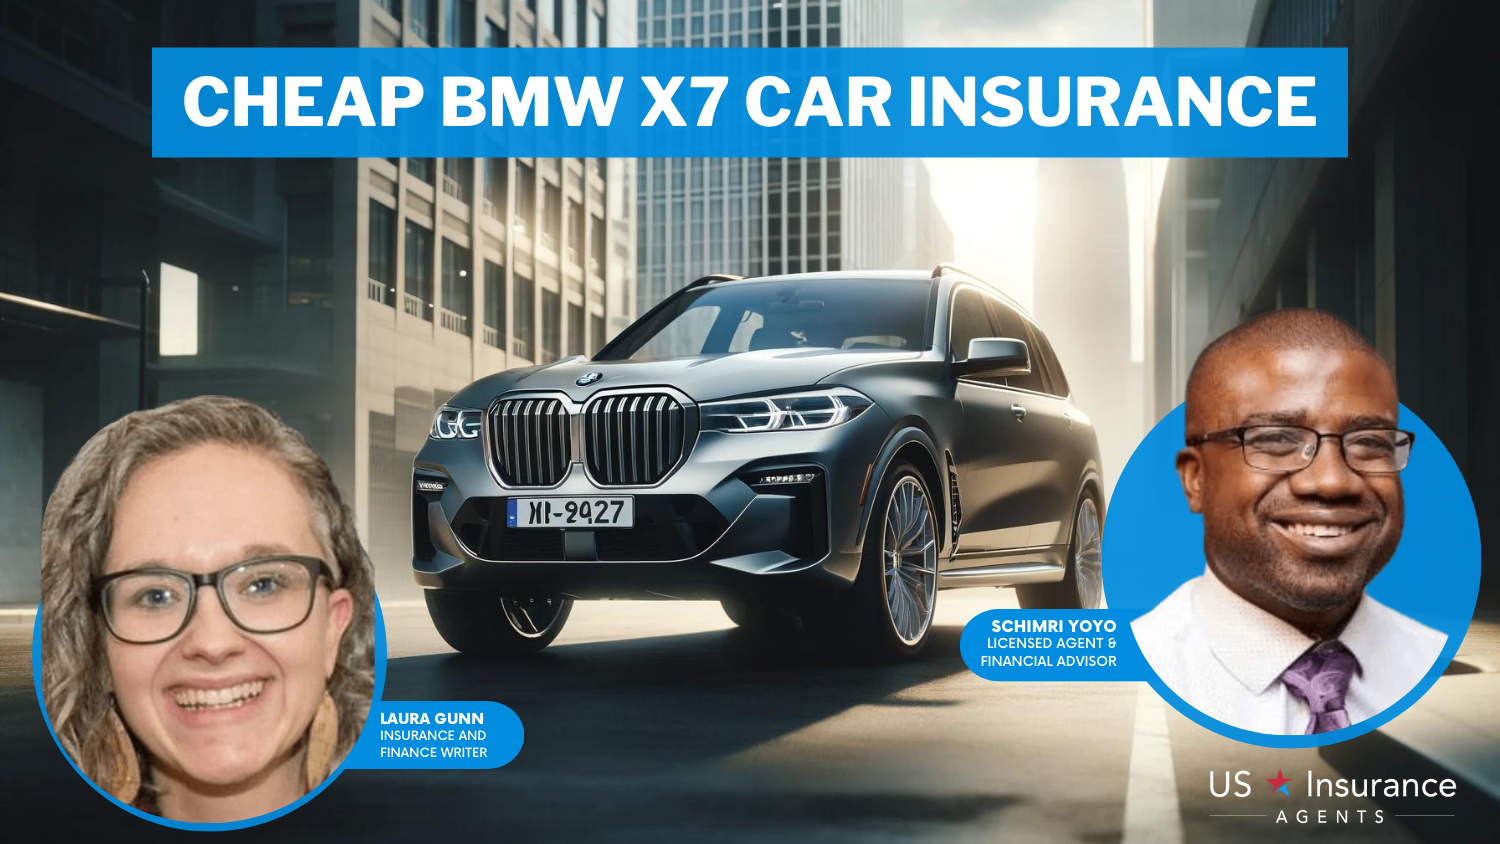 The General, Allstate and USAA: Cheap BMW X7 Car Insurance